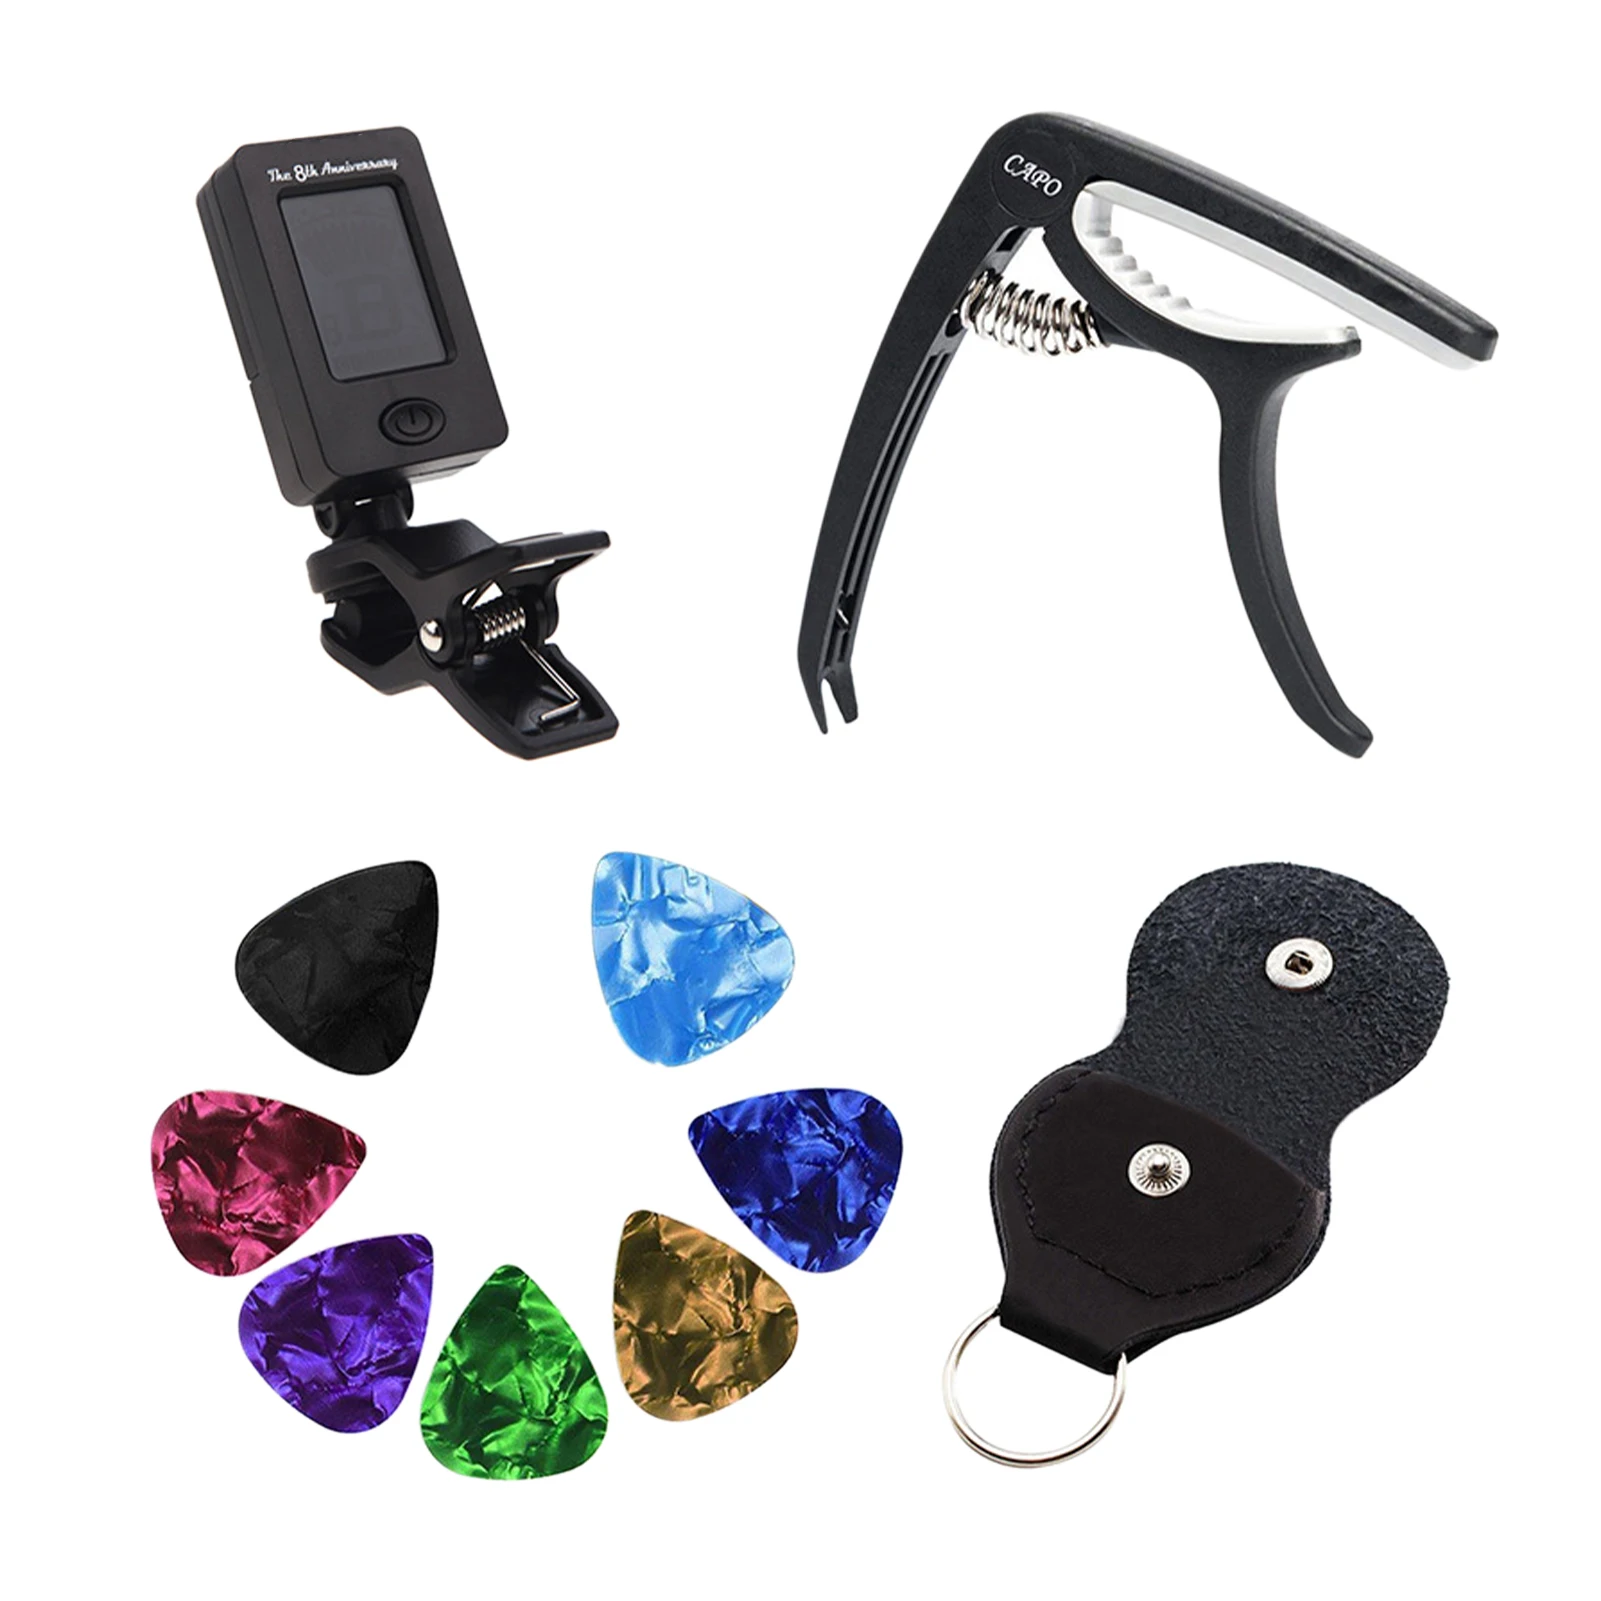 

Home Universal String Winder Lightweight Clip On 3 In 1 Acoustic Guitar Tuner Capo Combo Bass Violin Multifunction Beginners